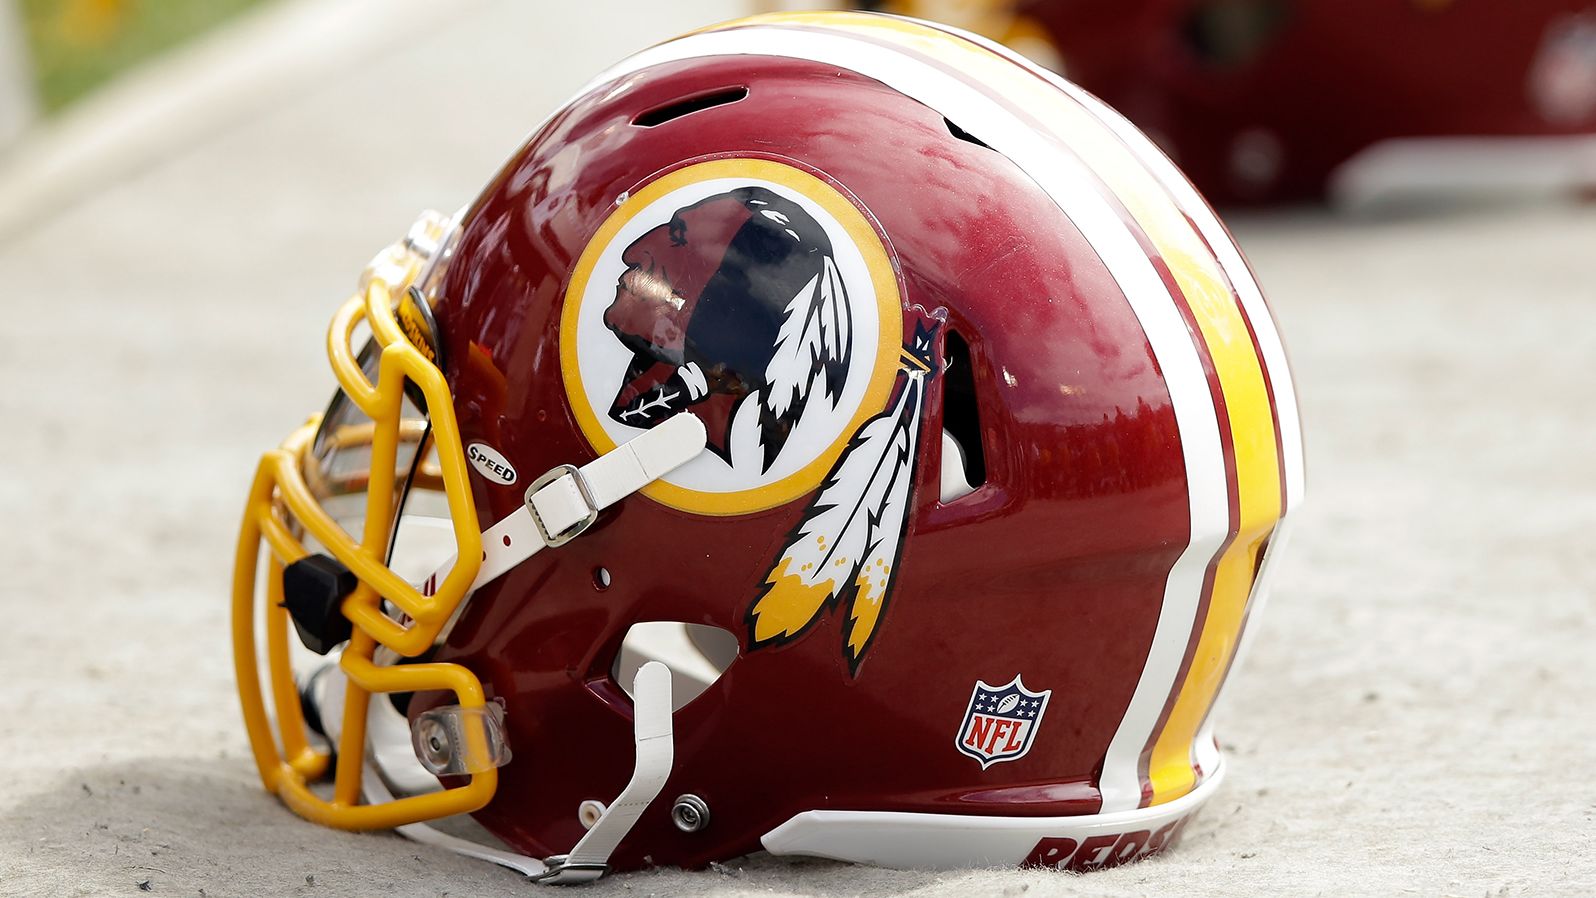 The NFL's Washington Redskins are reviewing their name.